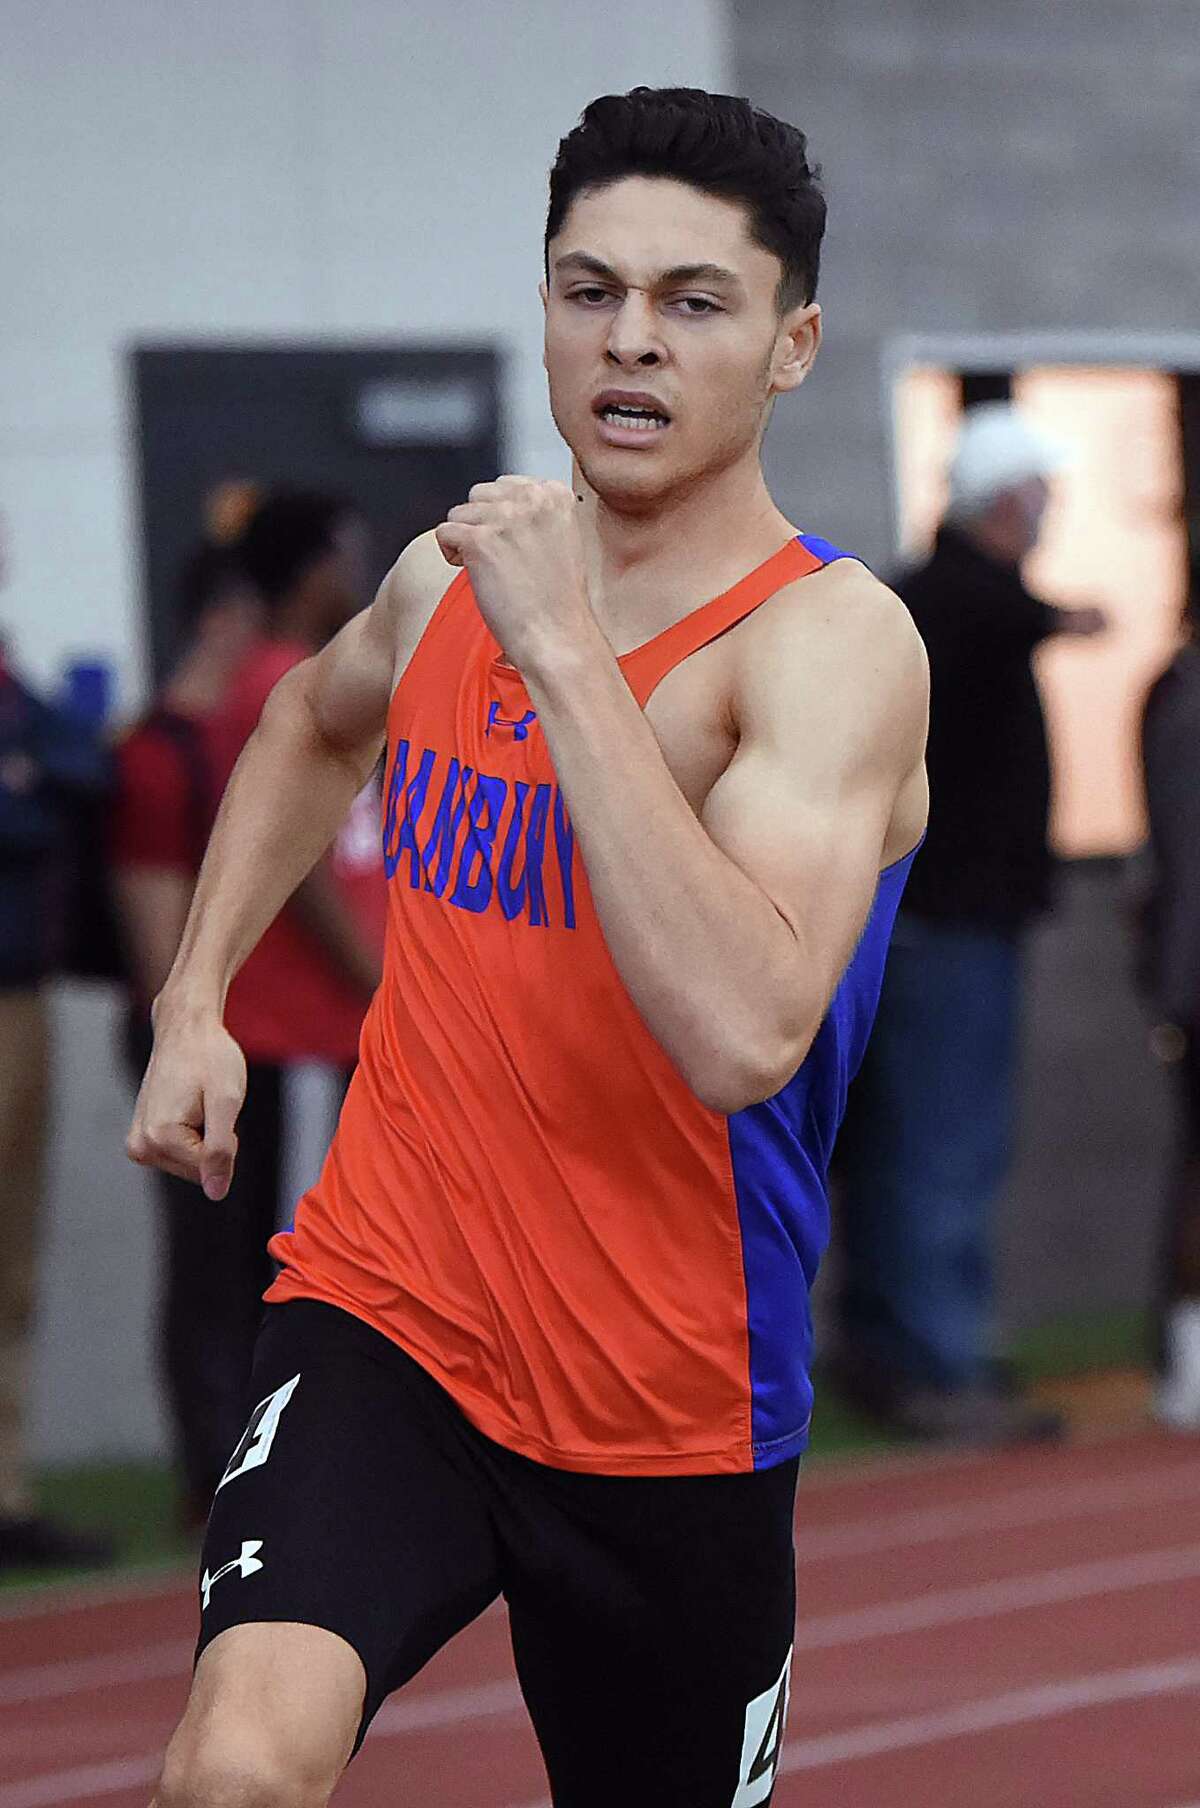 Danbury junior Malcolm Going won the 600 meter run in 1:20.40 at the CIAC Boys Indoor Track & Field State Open, Saturday, Feb. 17, 2018, at Floyd Little Athletic Center at Hillhouse High School in New Haven.